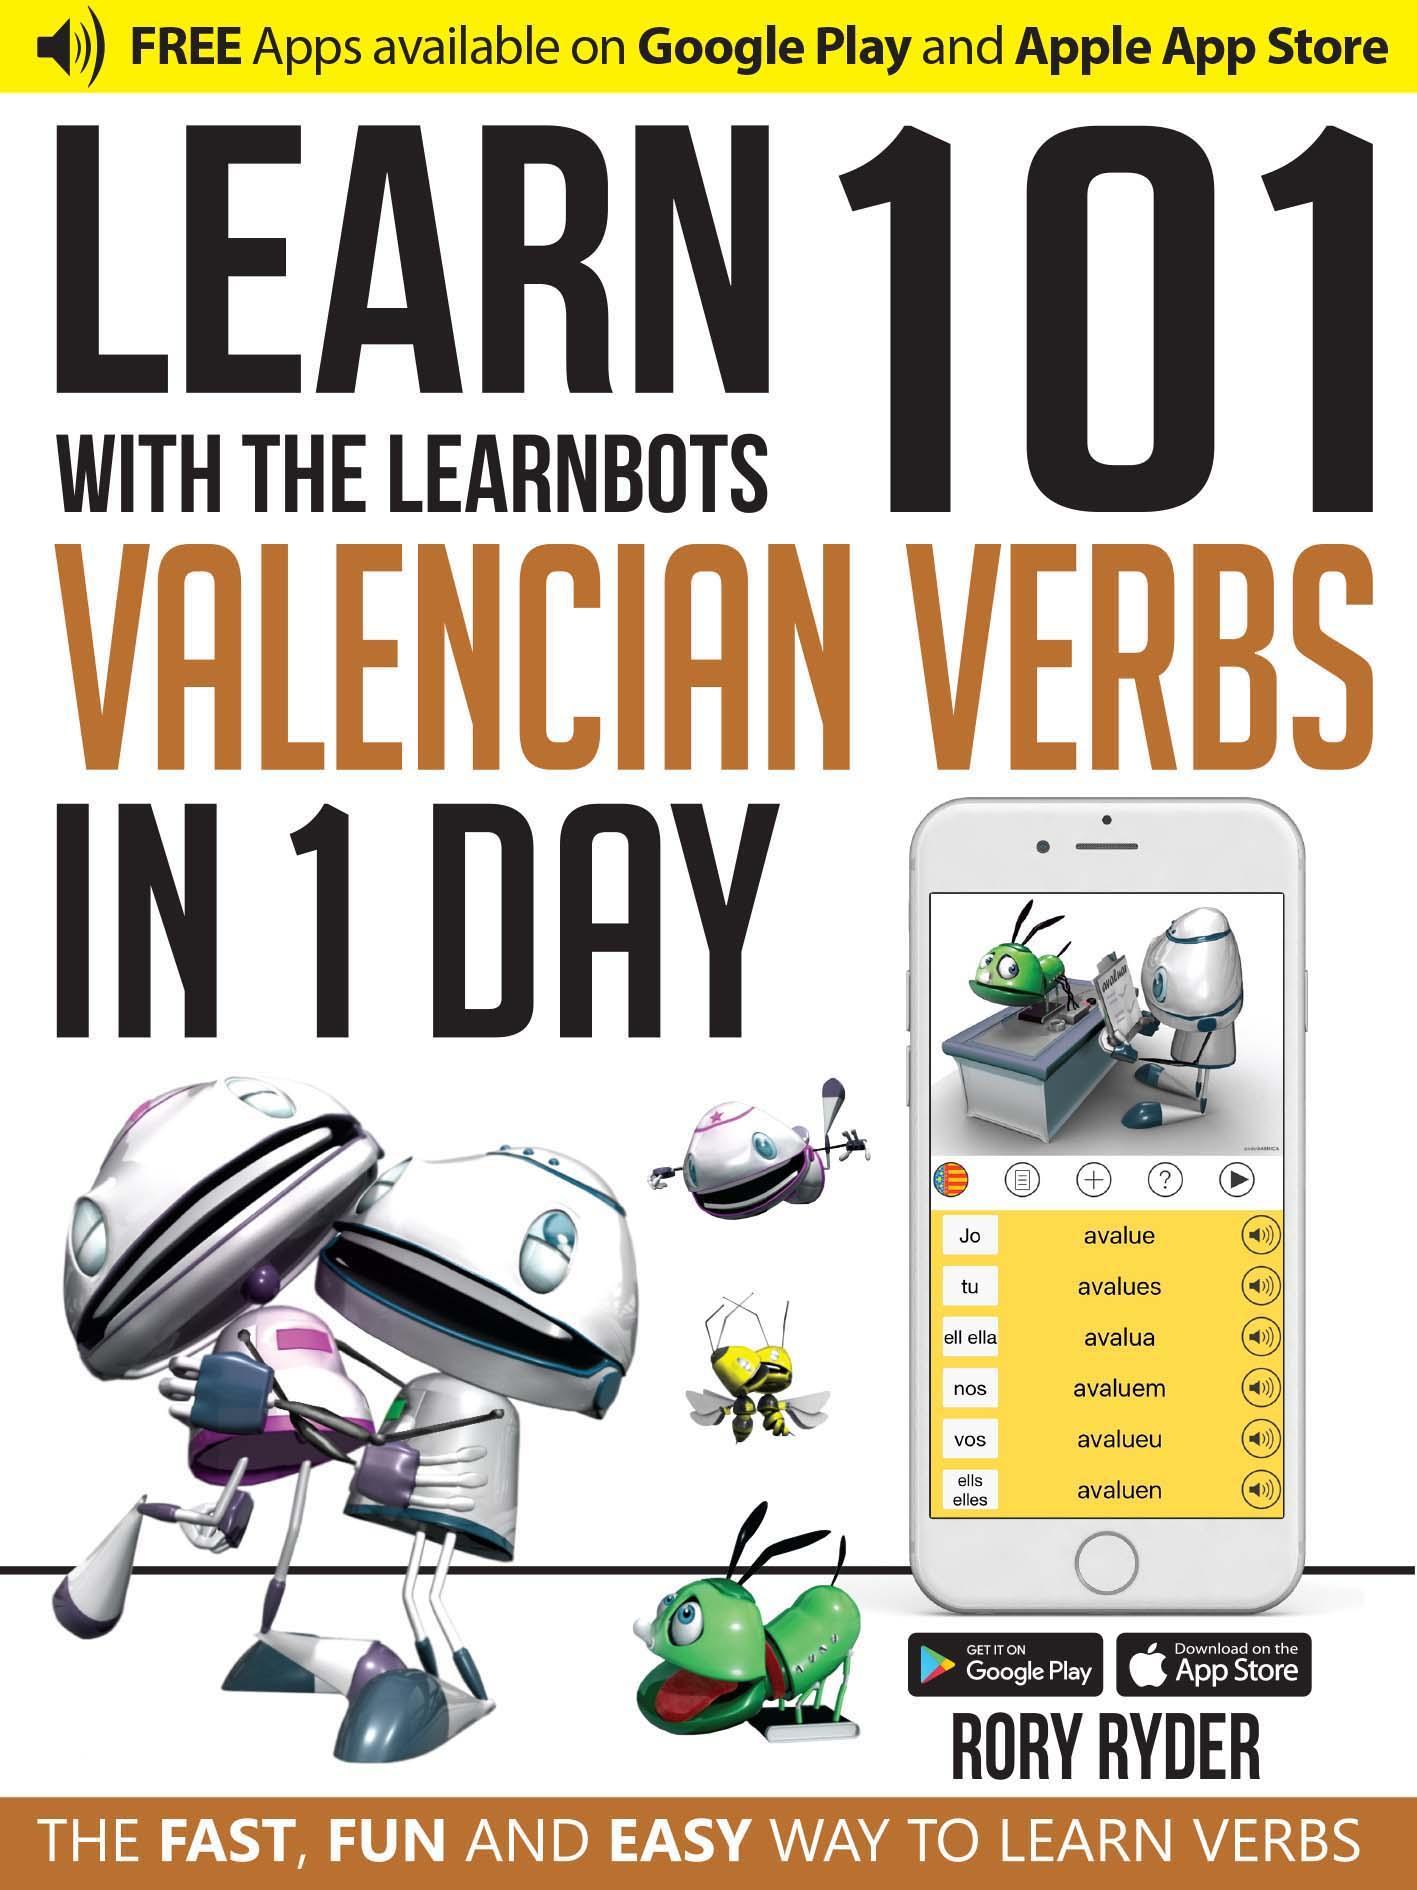 Learn 101 Valencian Verbs in 1 Day with the Learnbots